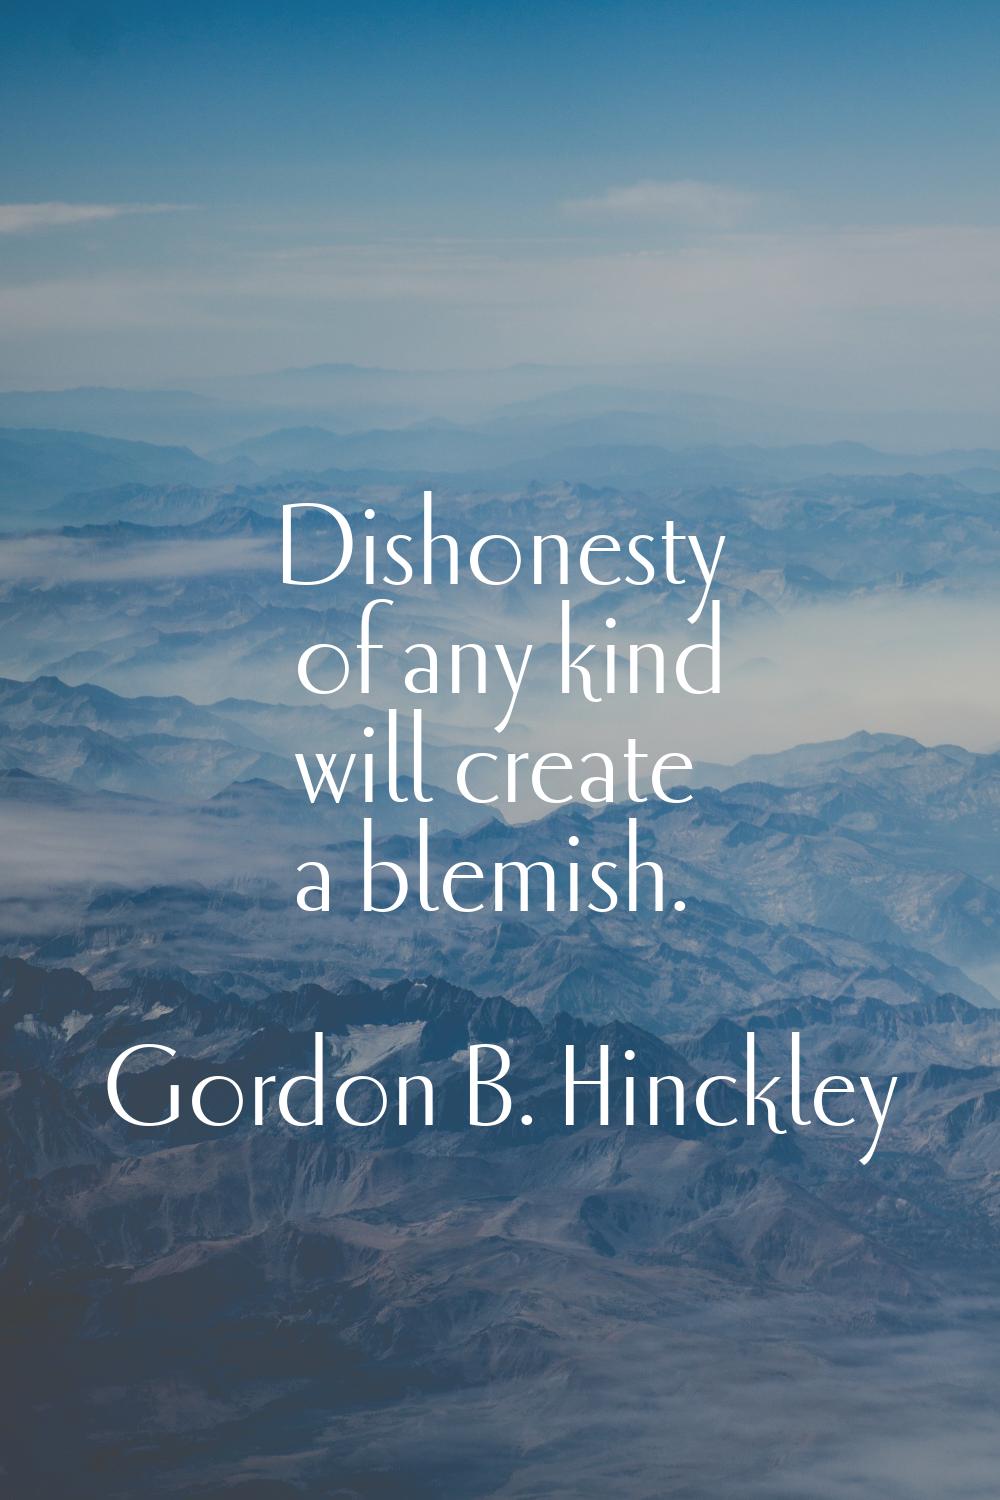 Dishonesty of any kind will create a blemish.